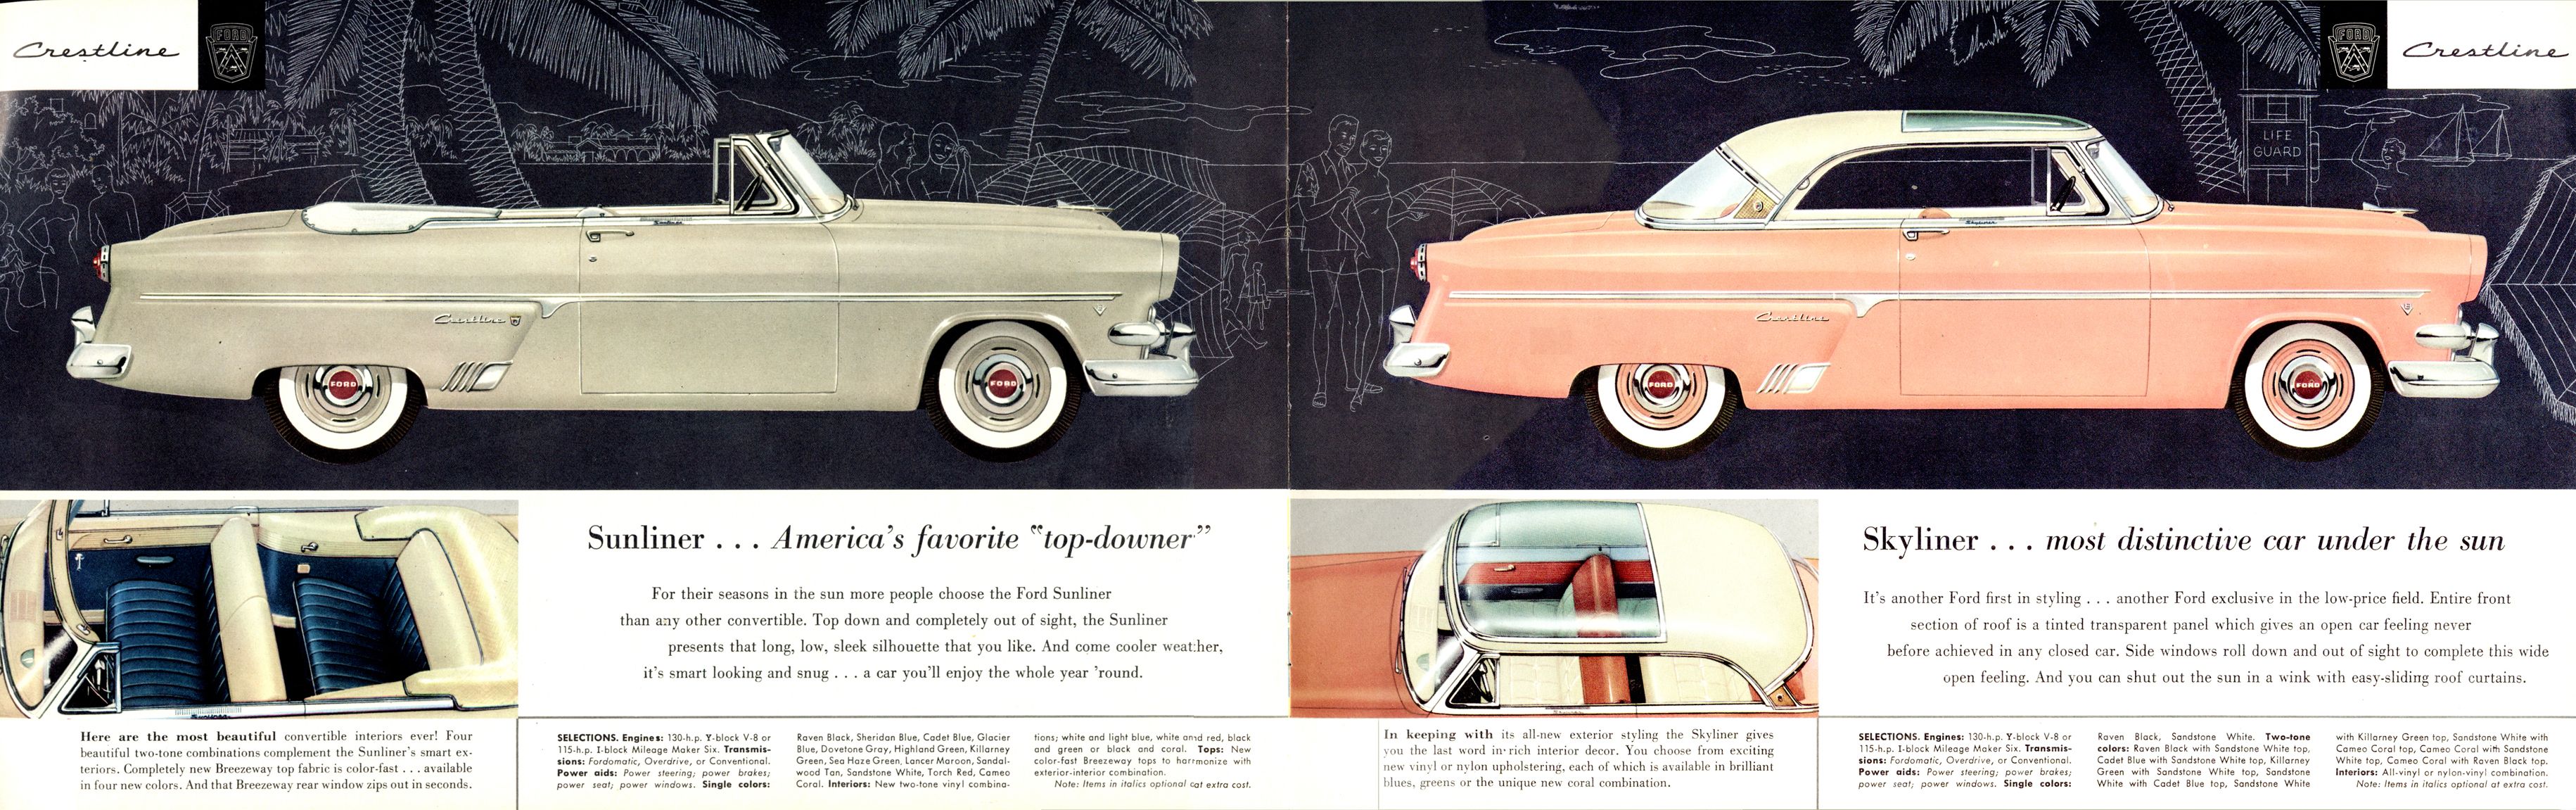 1954 Ford-16-17